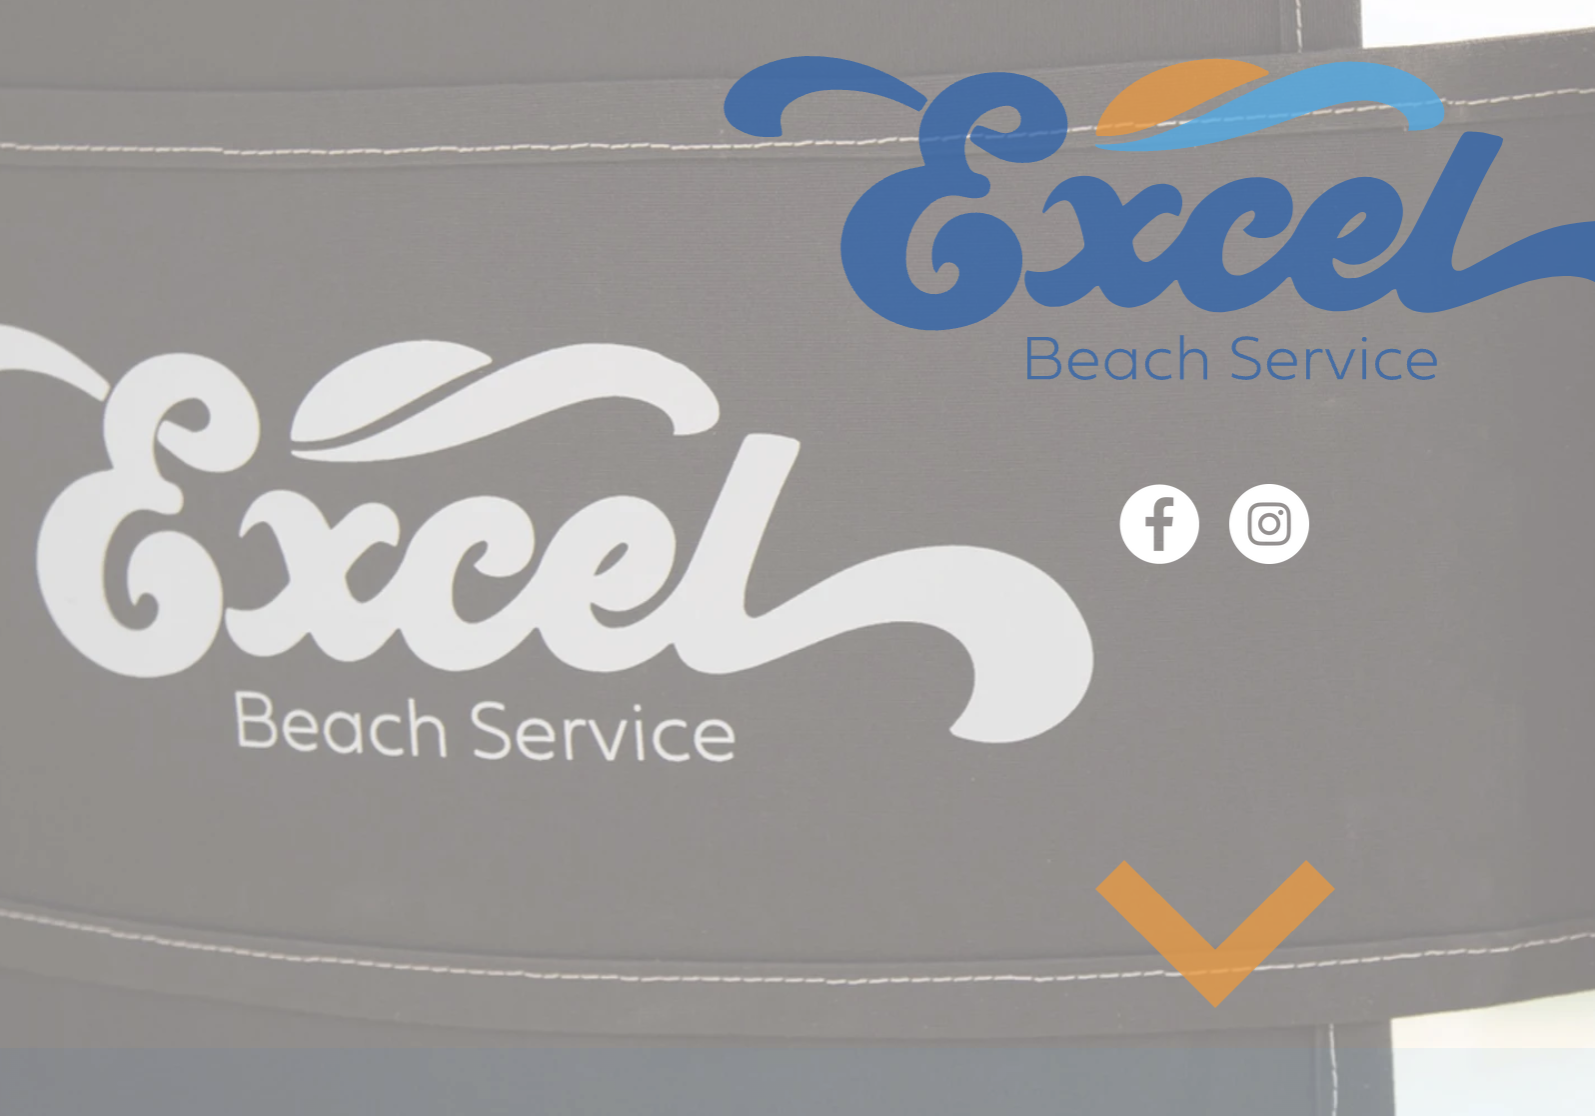 Foley Space Leased To Excel Beach Services